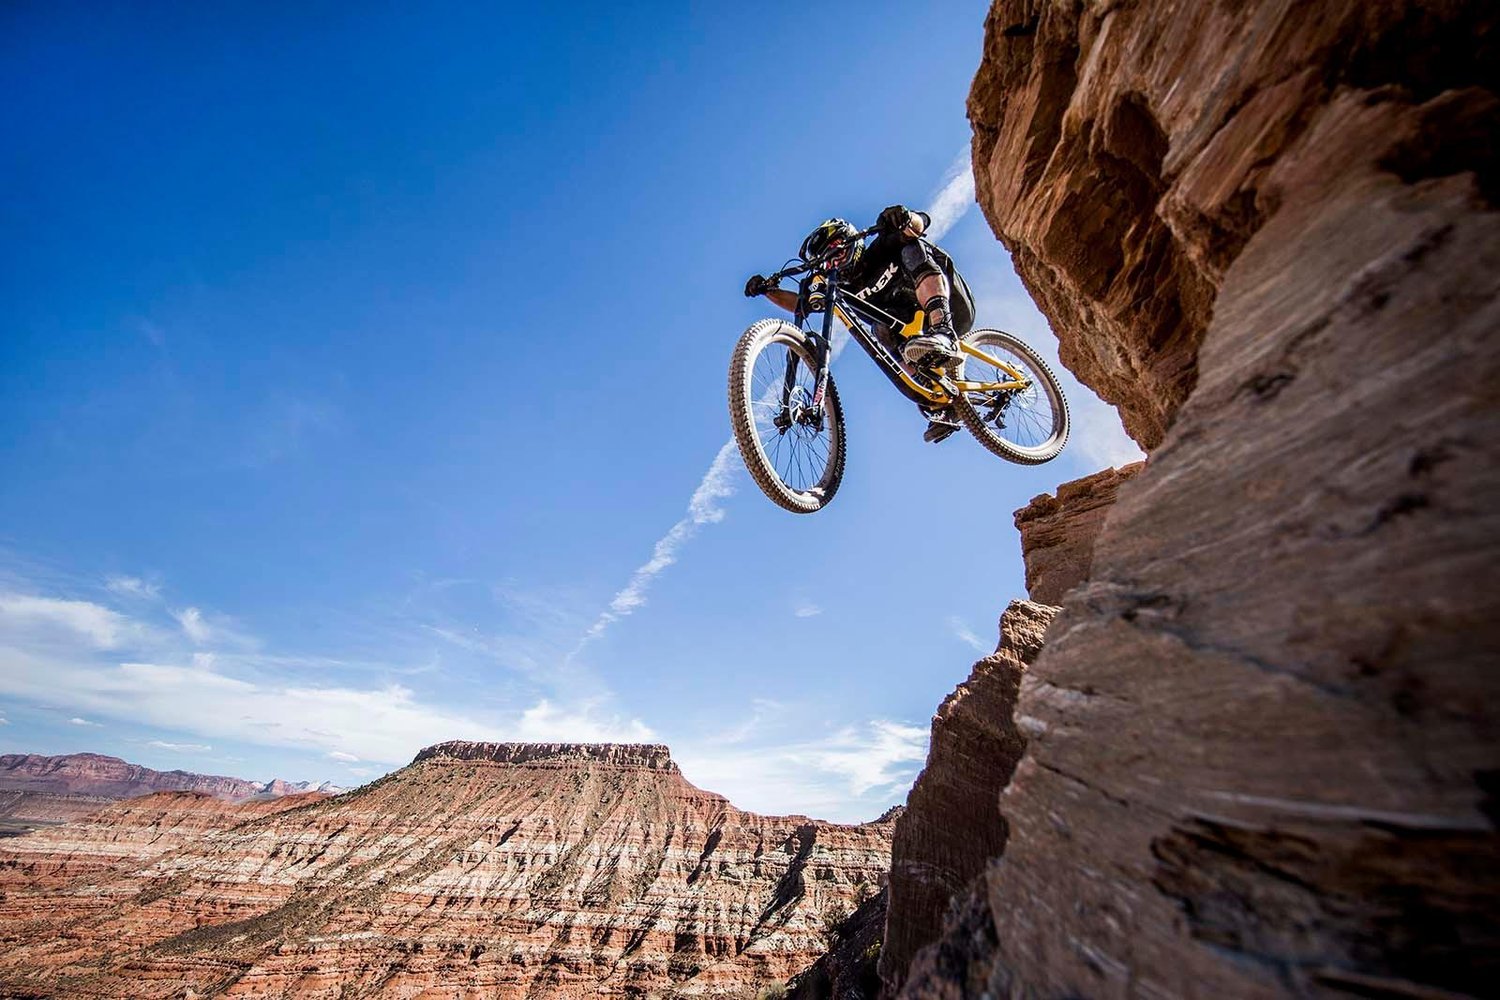 Ryan Howard of the USA competes during qualification day of the tenth edition of the Red Bull Rampage, Virgin, Utah, USA on October 15th 2015.